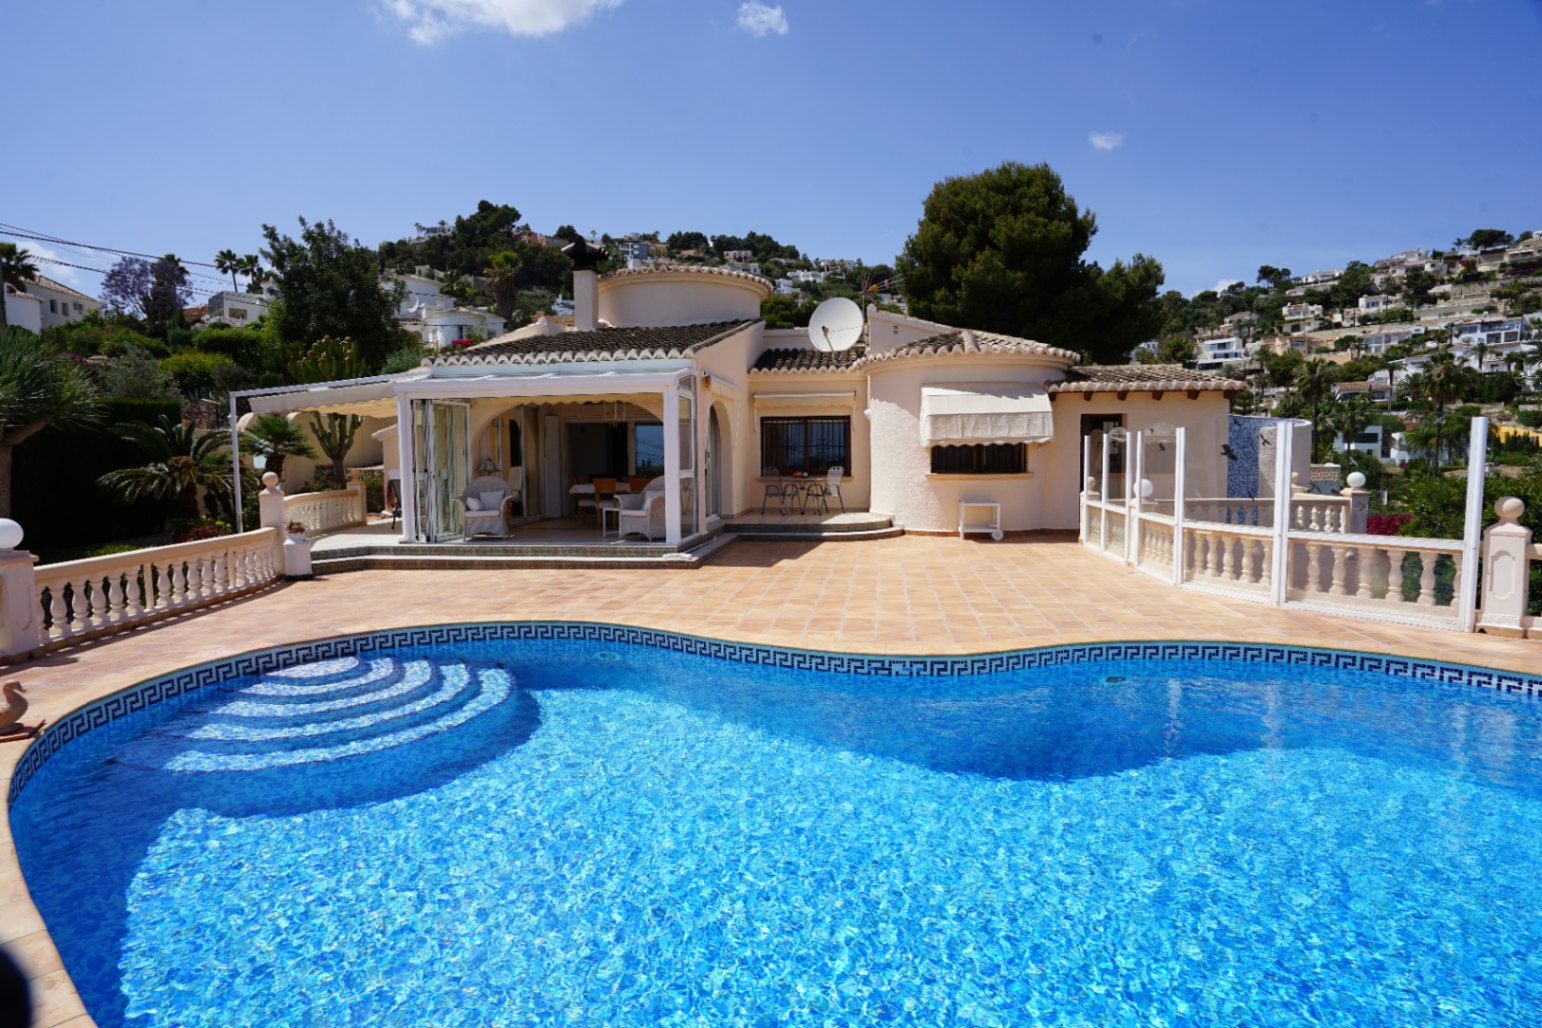 Photogallery - 41 - Exceptional homes in the Costa Blanca. Unparalleled Service. Exceptional properties in the Costa Blanca